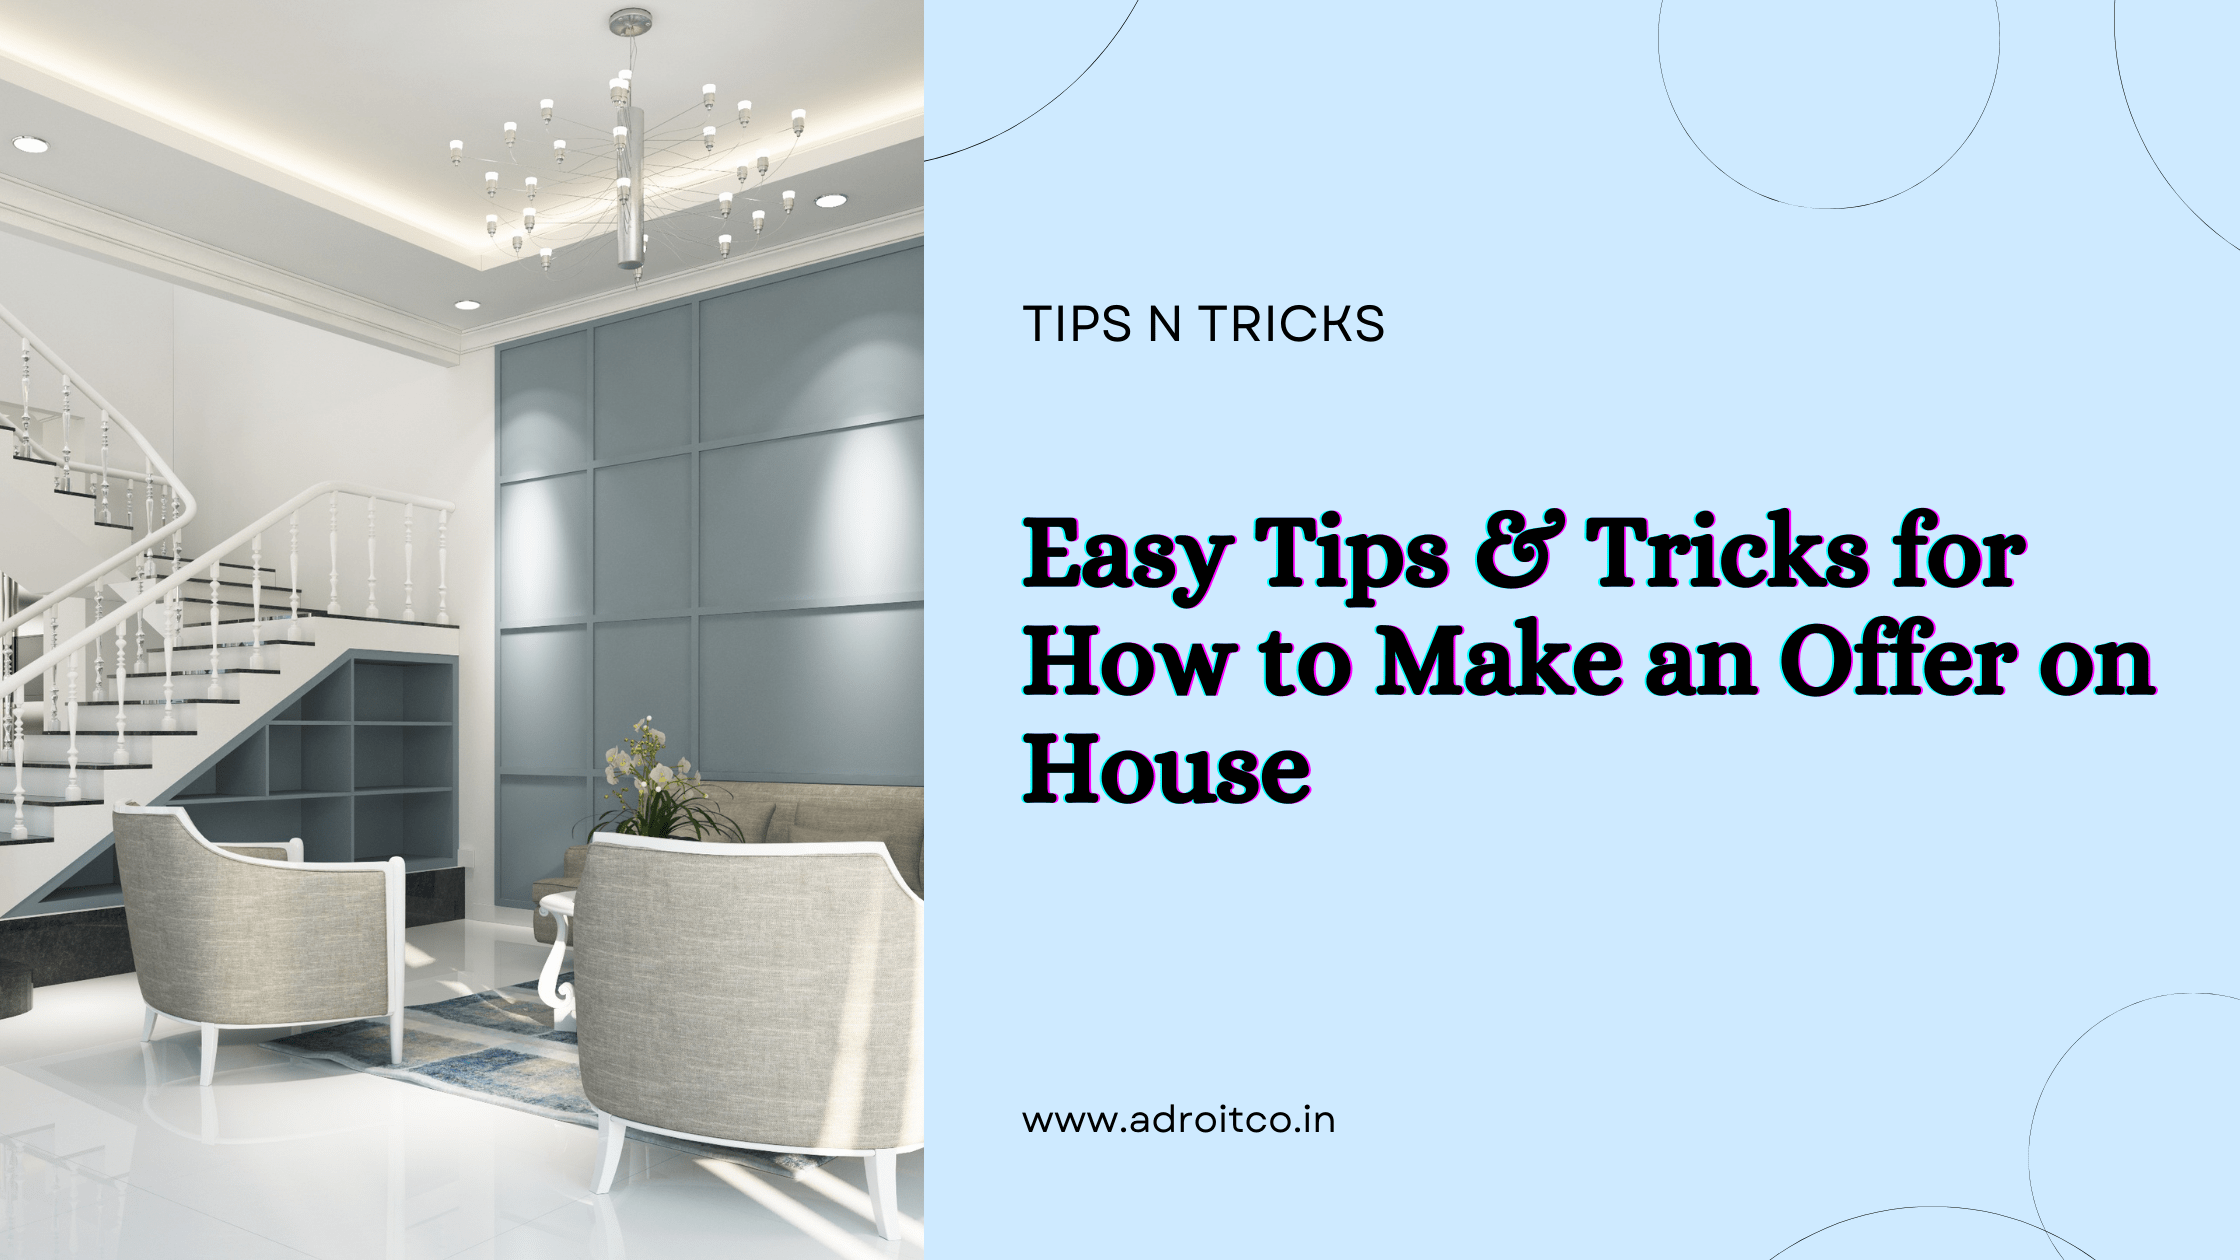 Easy Tips & Tricks for How to Make an Offer on House